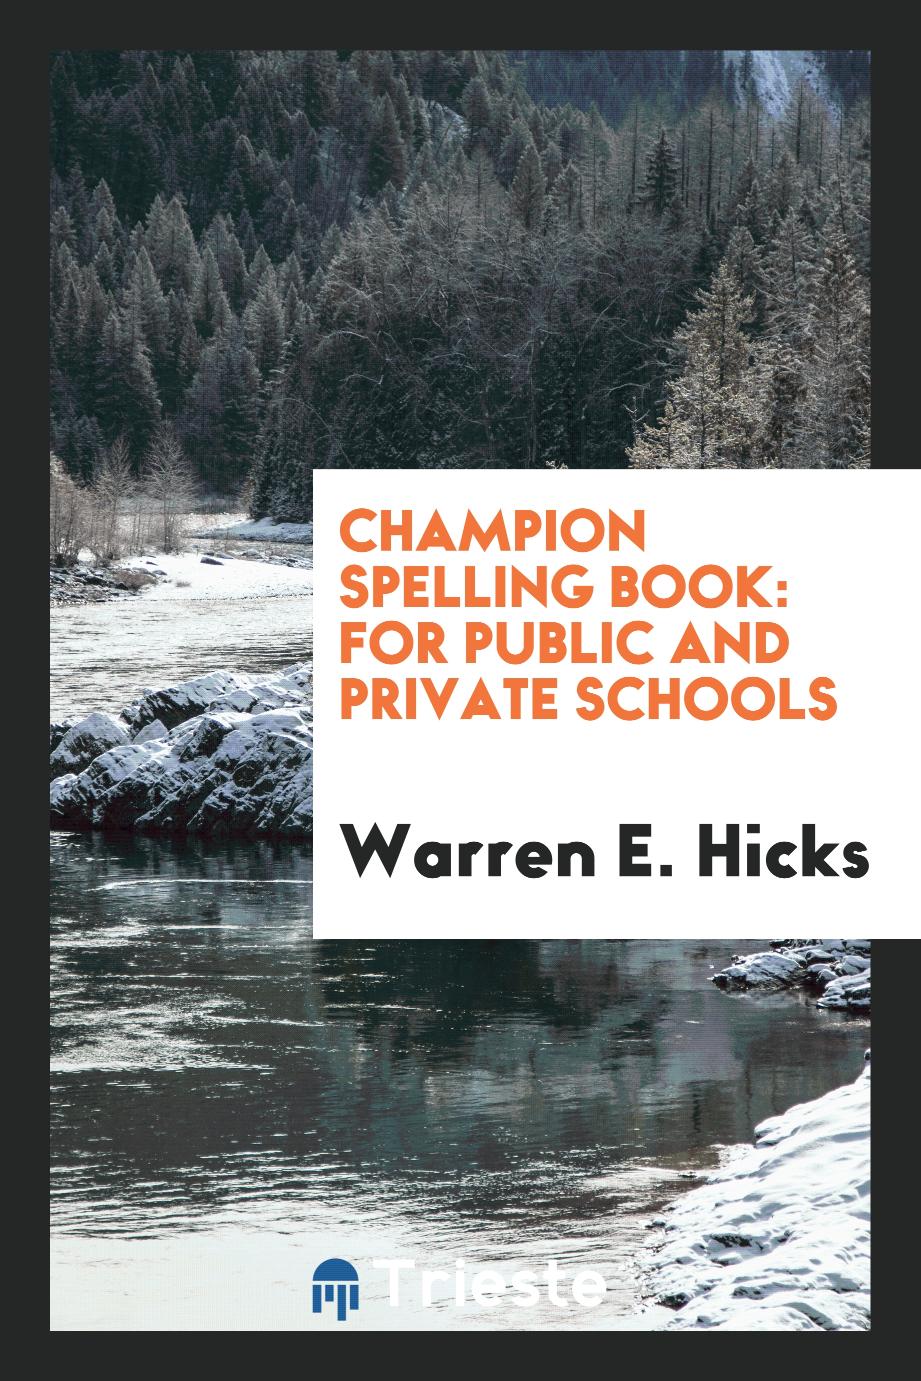 Champion Spelling Book: For Public and Private Schools